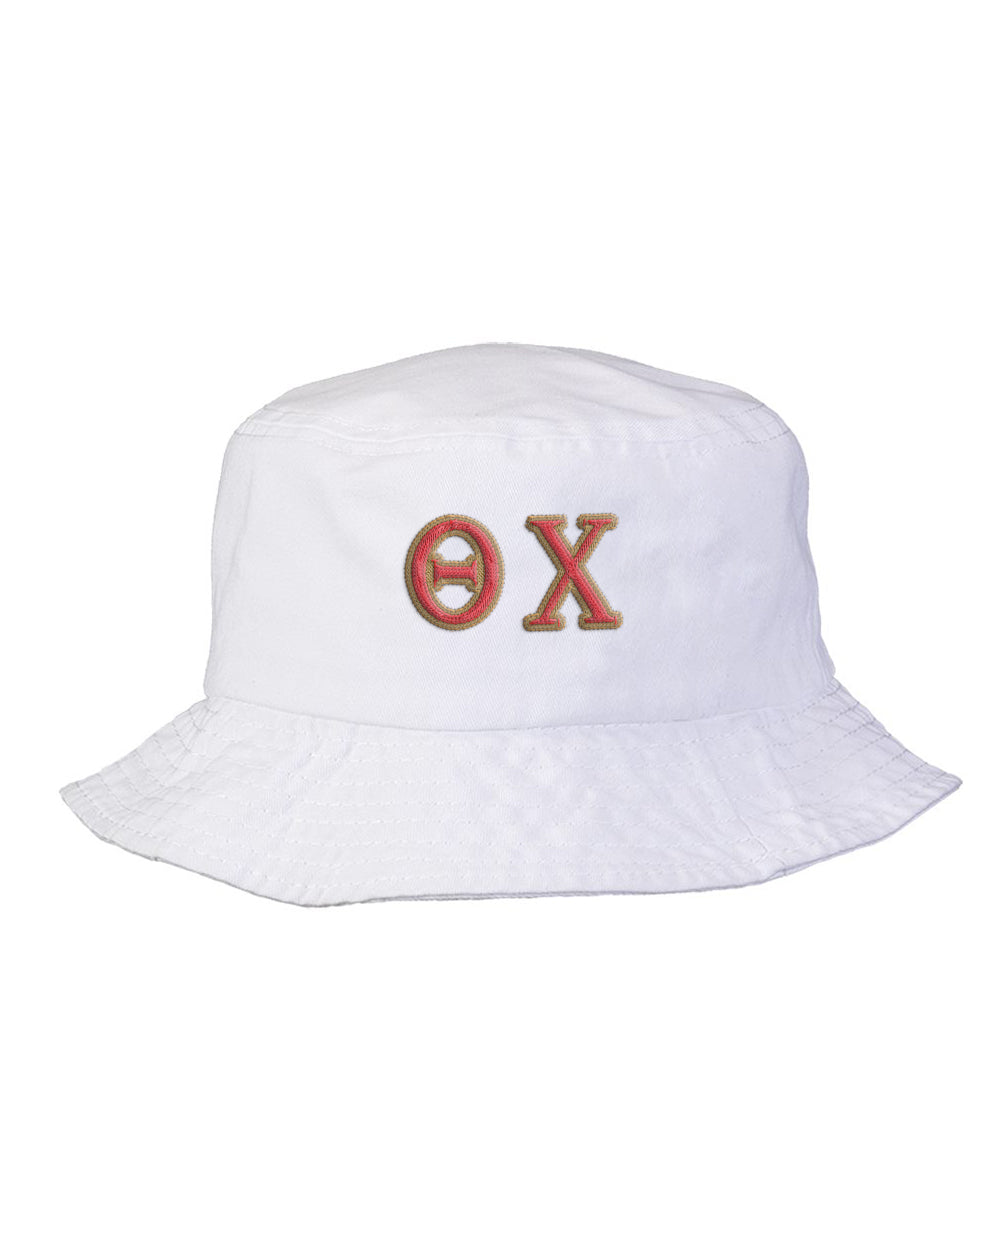 Theta Chi Embroidered Bucket Hat